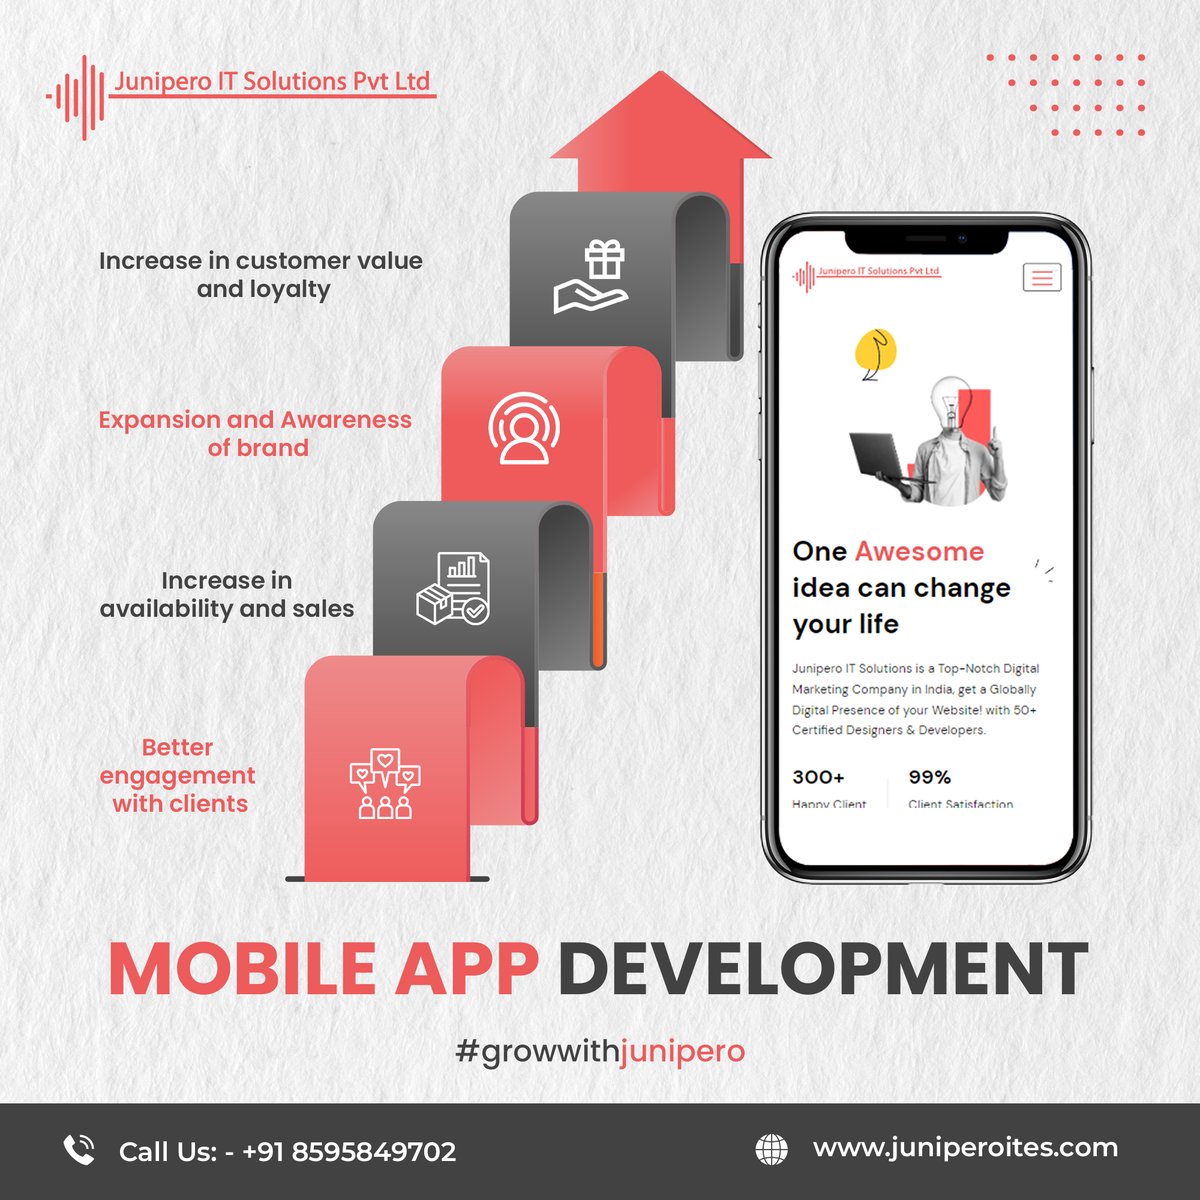 Having problems with designing your mobile app, let us help you with it.
-
-
-
#mobileappdesign #iosapp #androidapp #appdevelopment #webdevelopment #growwithjunipero #appdeveloper